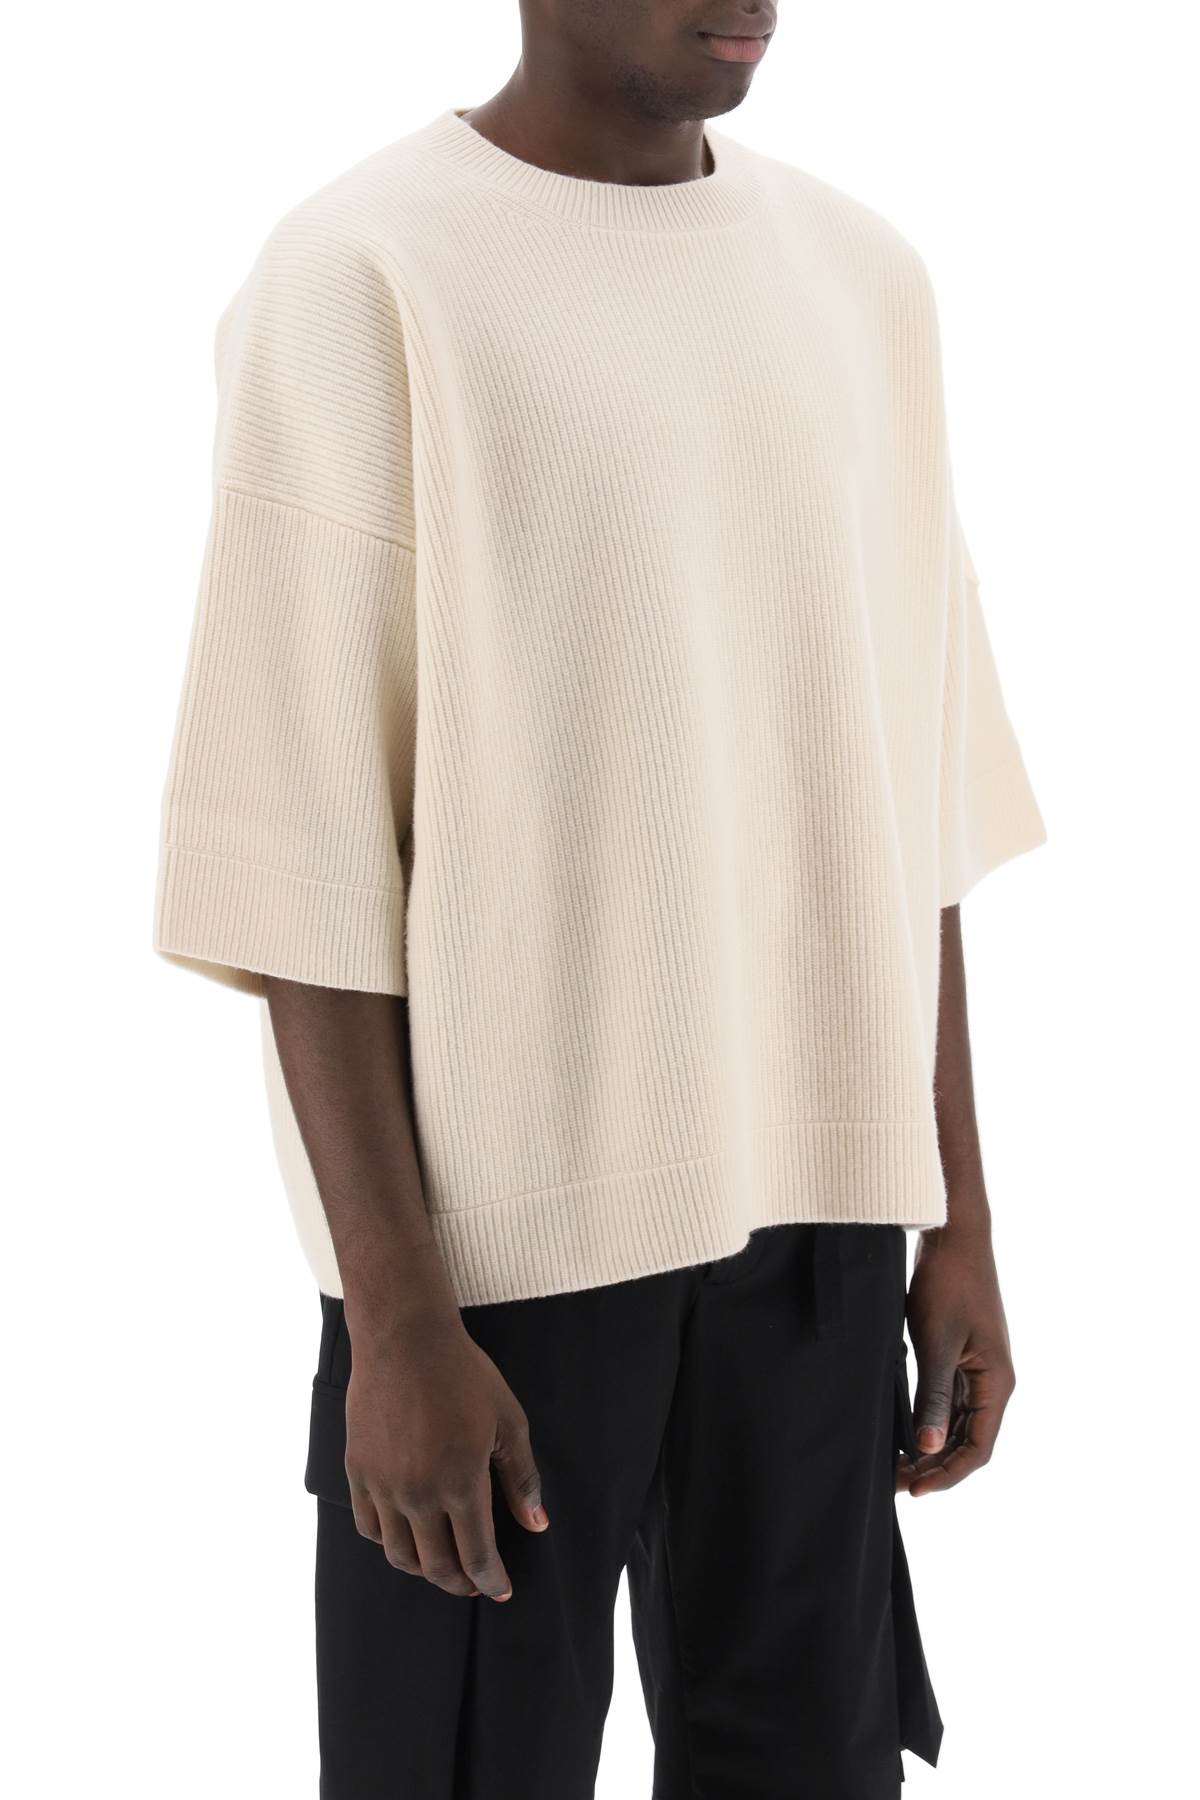 MONCLER X ROC NATION BY JAY Z Multicolor Short-Sleeved Wool Sweater for Men - FW23 Collection